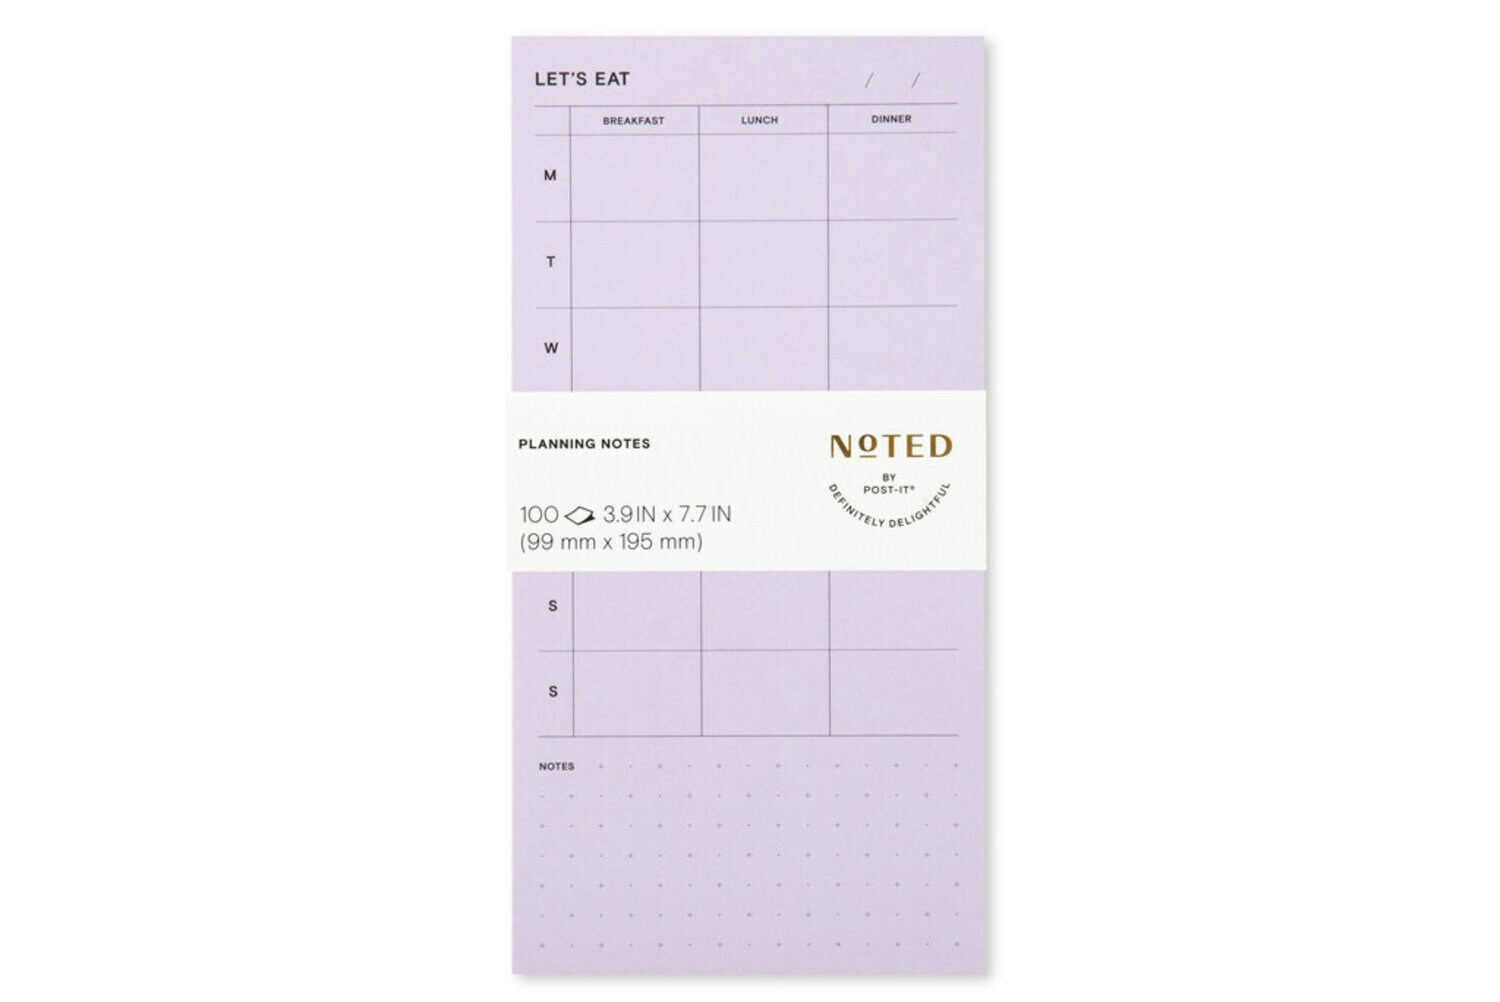 7100257991 - Post-it Printed Notes NTD-48-LIL, 3.9 in x 7.7 in (99 mm x 195 mm)